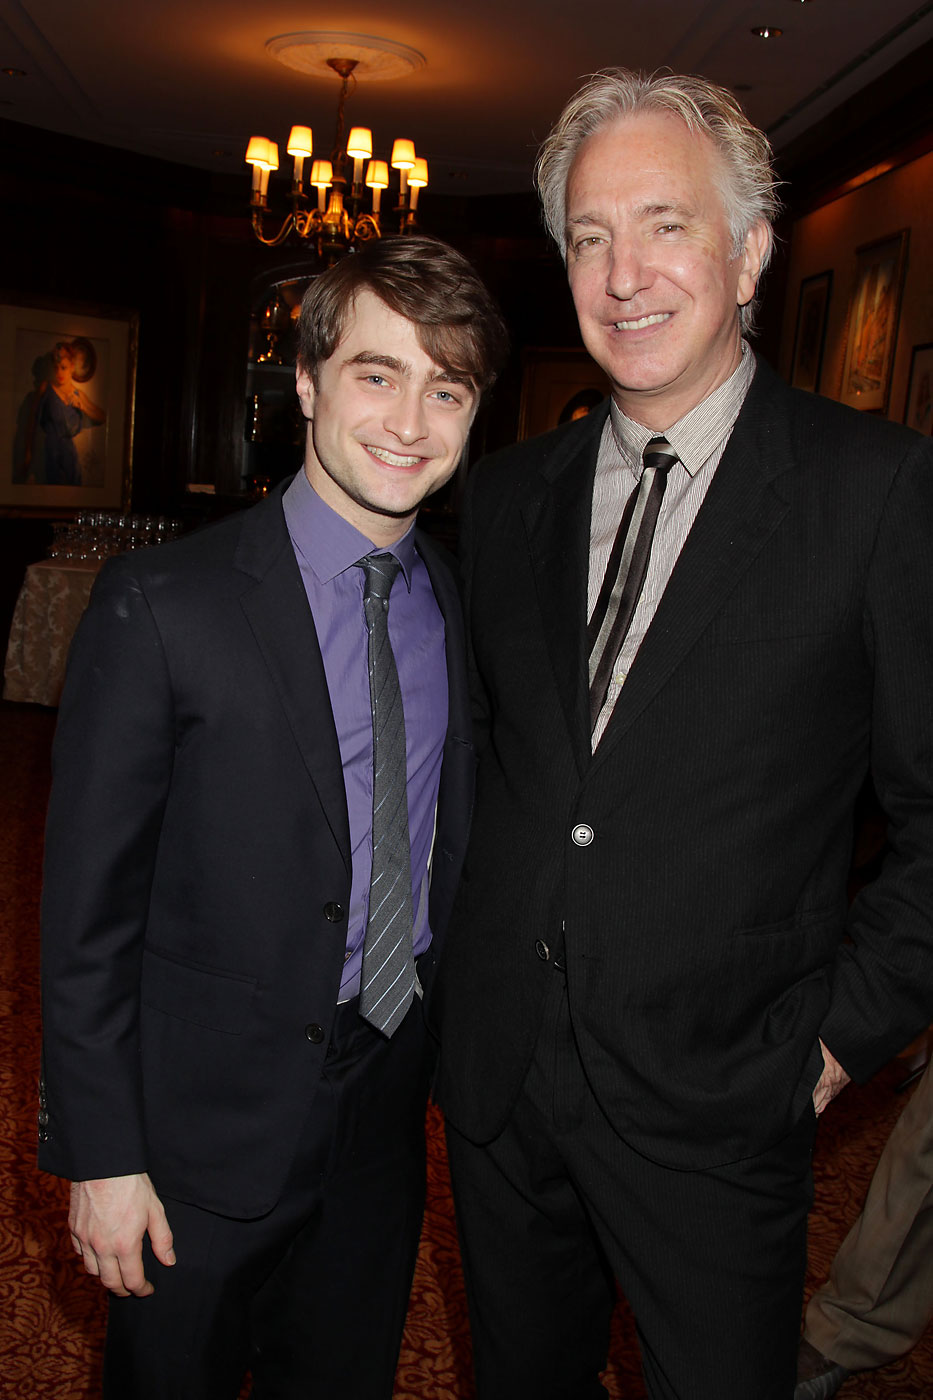 Daniel Radcliffe and Alan Rickman at a luncheon for "Harry Potter and the Deathly Hallows Part 2," at 21 Club, Monday, Nov. 21, 2011, in New York. (Dave Allocca—AP)